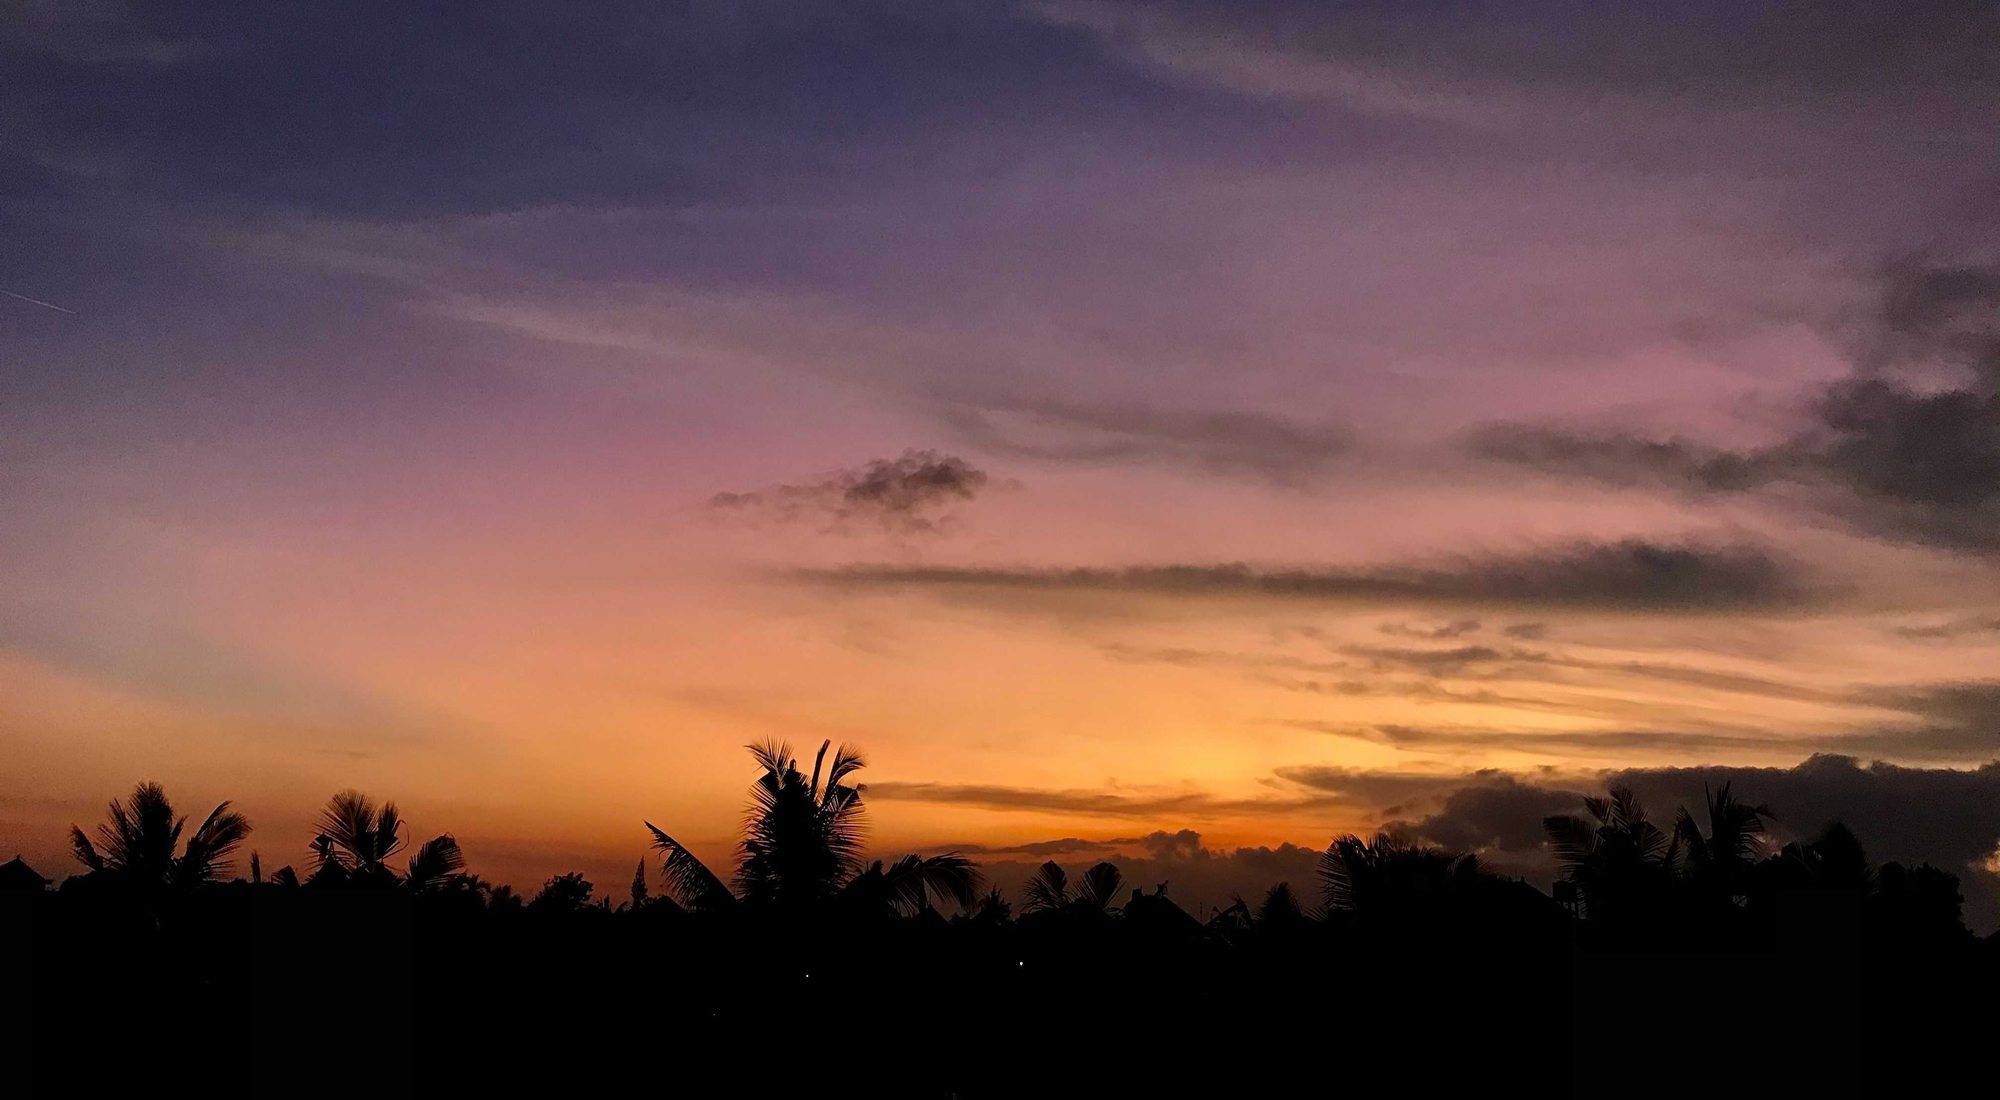 Real photo of a stunning sunset from Shan's homestay in Ubud, Bali. Photo credit: Shan Thoo.